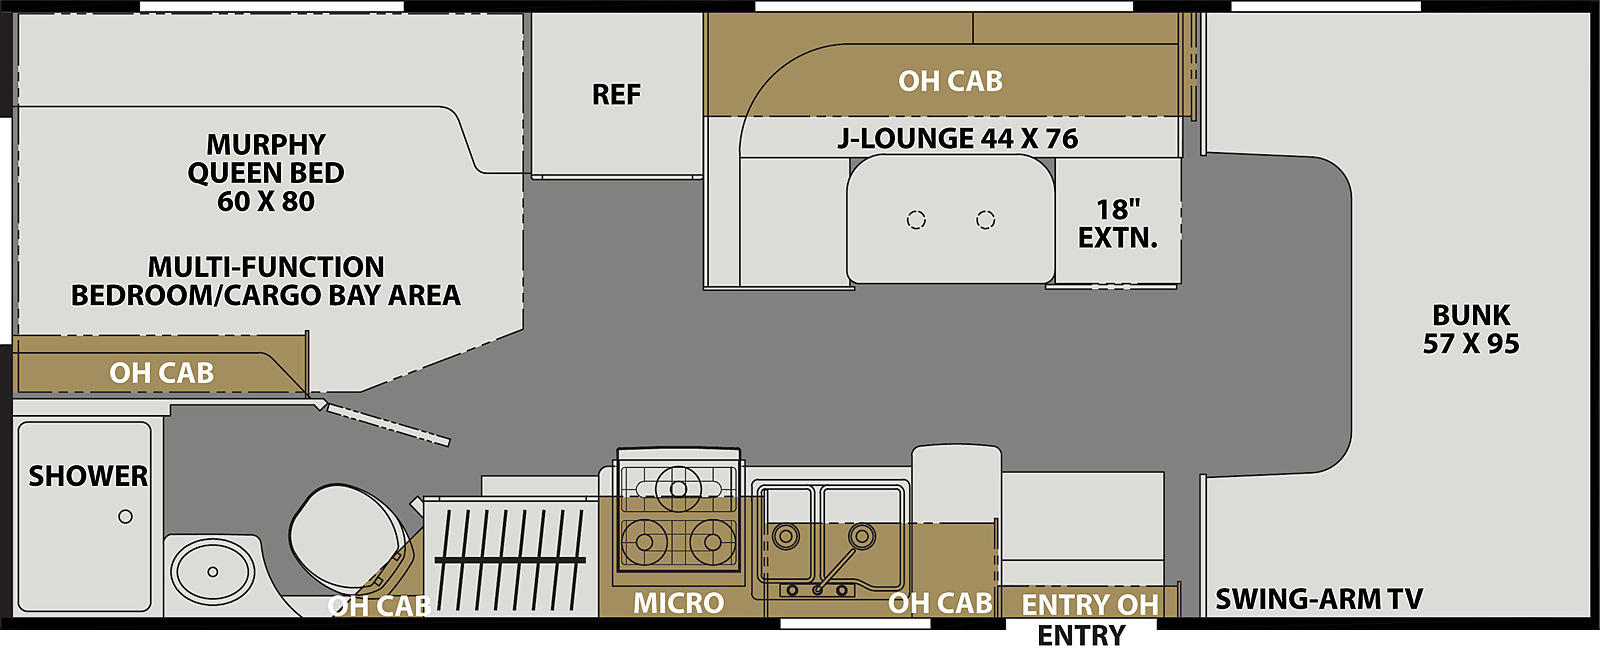 The Freelander 22XG CHEVY 3500 has 0 slideouts. Interior layout from front to back; front 57 inch by 95 inch bunk with swing arm TV; door side kitchen with microwave above stovetop, double basin sink and overhead cabinet; off-door side 44 inch by 76 inch J-Lounge with 18 inch extension and overhead cabinets and refrigerator; rear off-door side 60 inch by 80 inch murphy queen bed in multi-function bedroom/cargo bay area with overhead cabinets; rear door side bathroom with shower, toilet and sink.